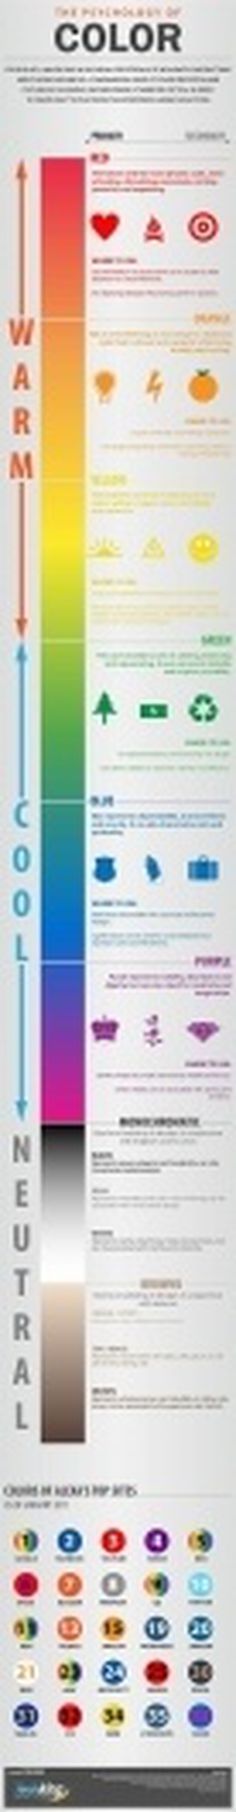 The psychology of color for web designers [infographic] - Holy Kaw! #infographic #color #psychology